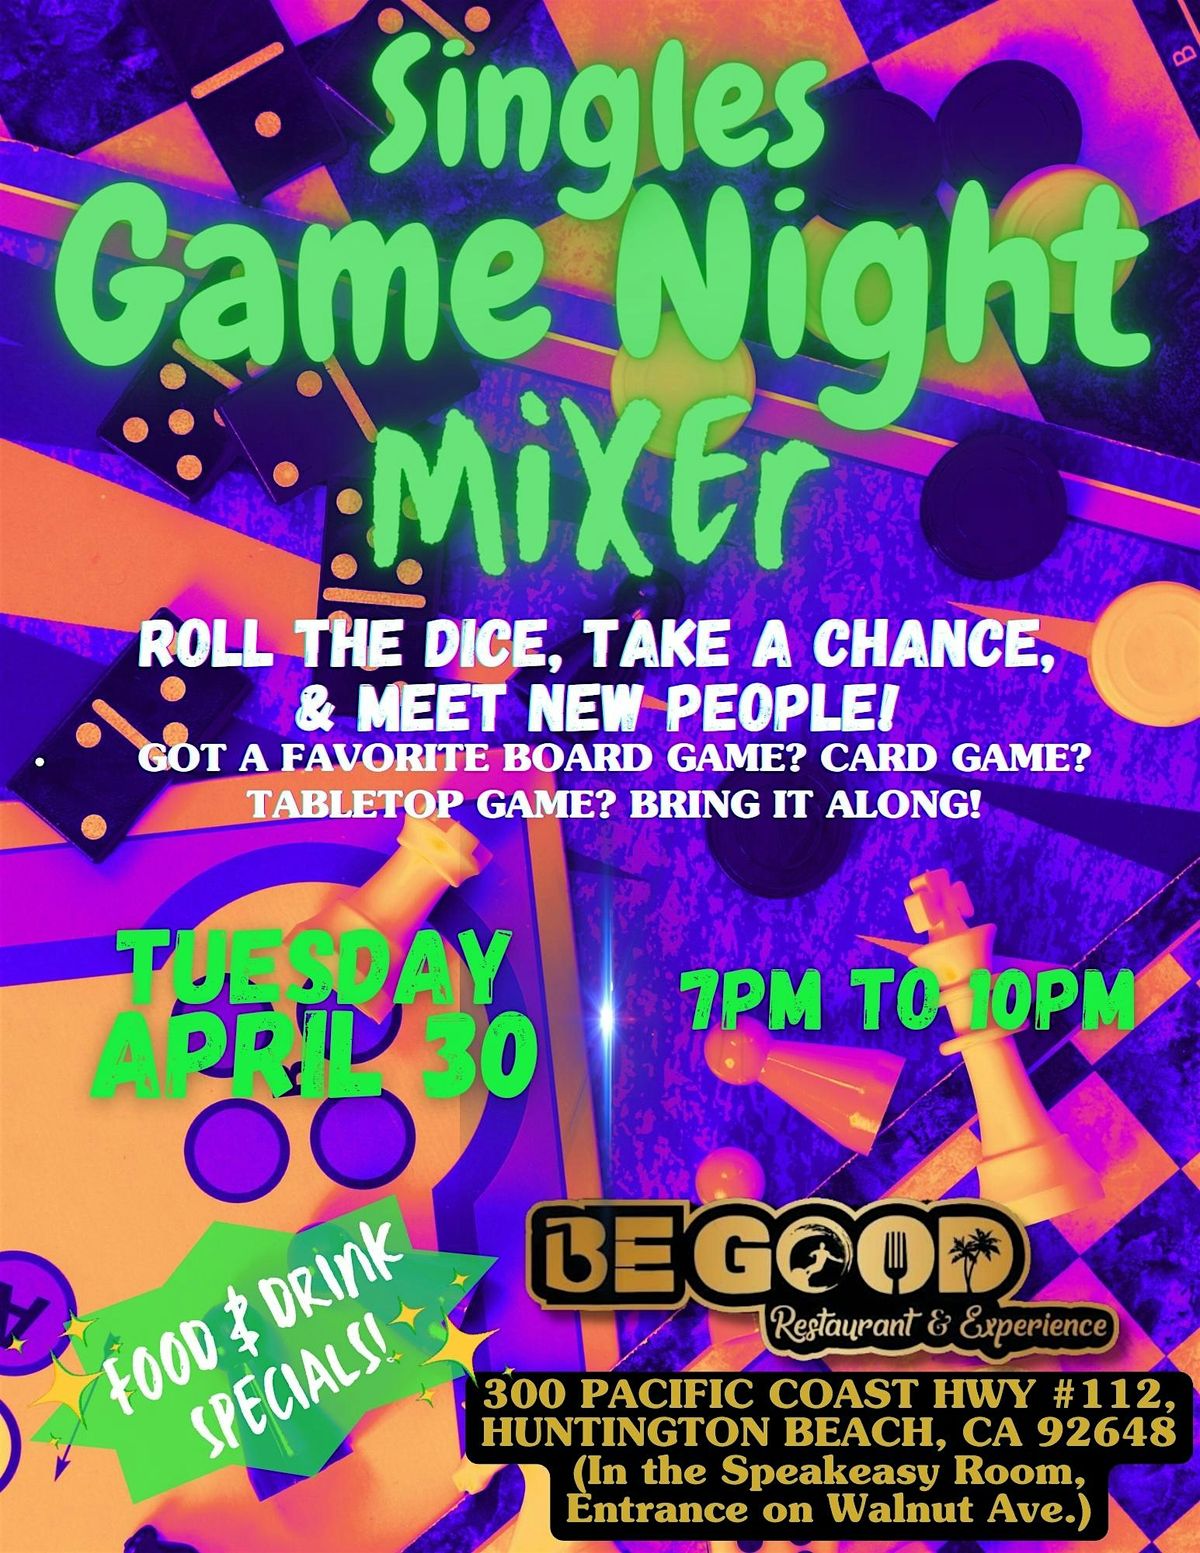 Singles Game Night Mixer (No Ticket Required)